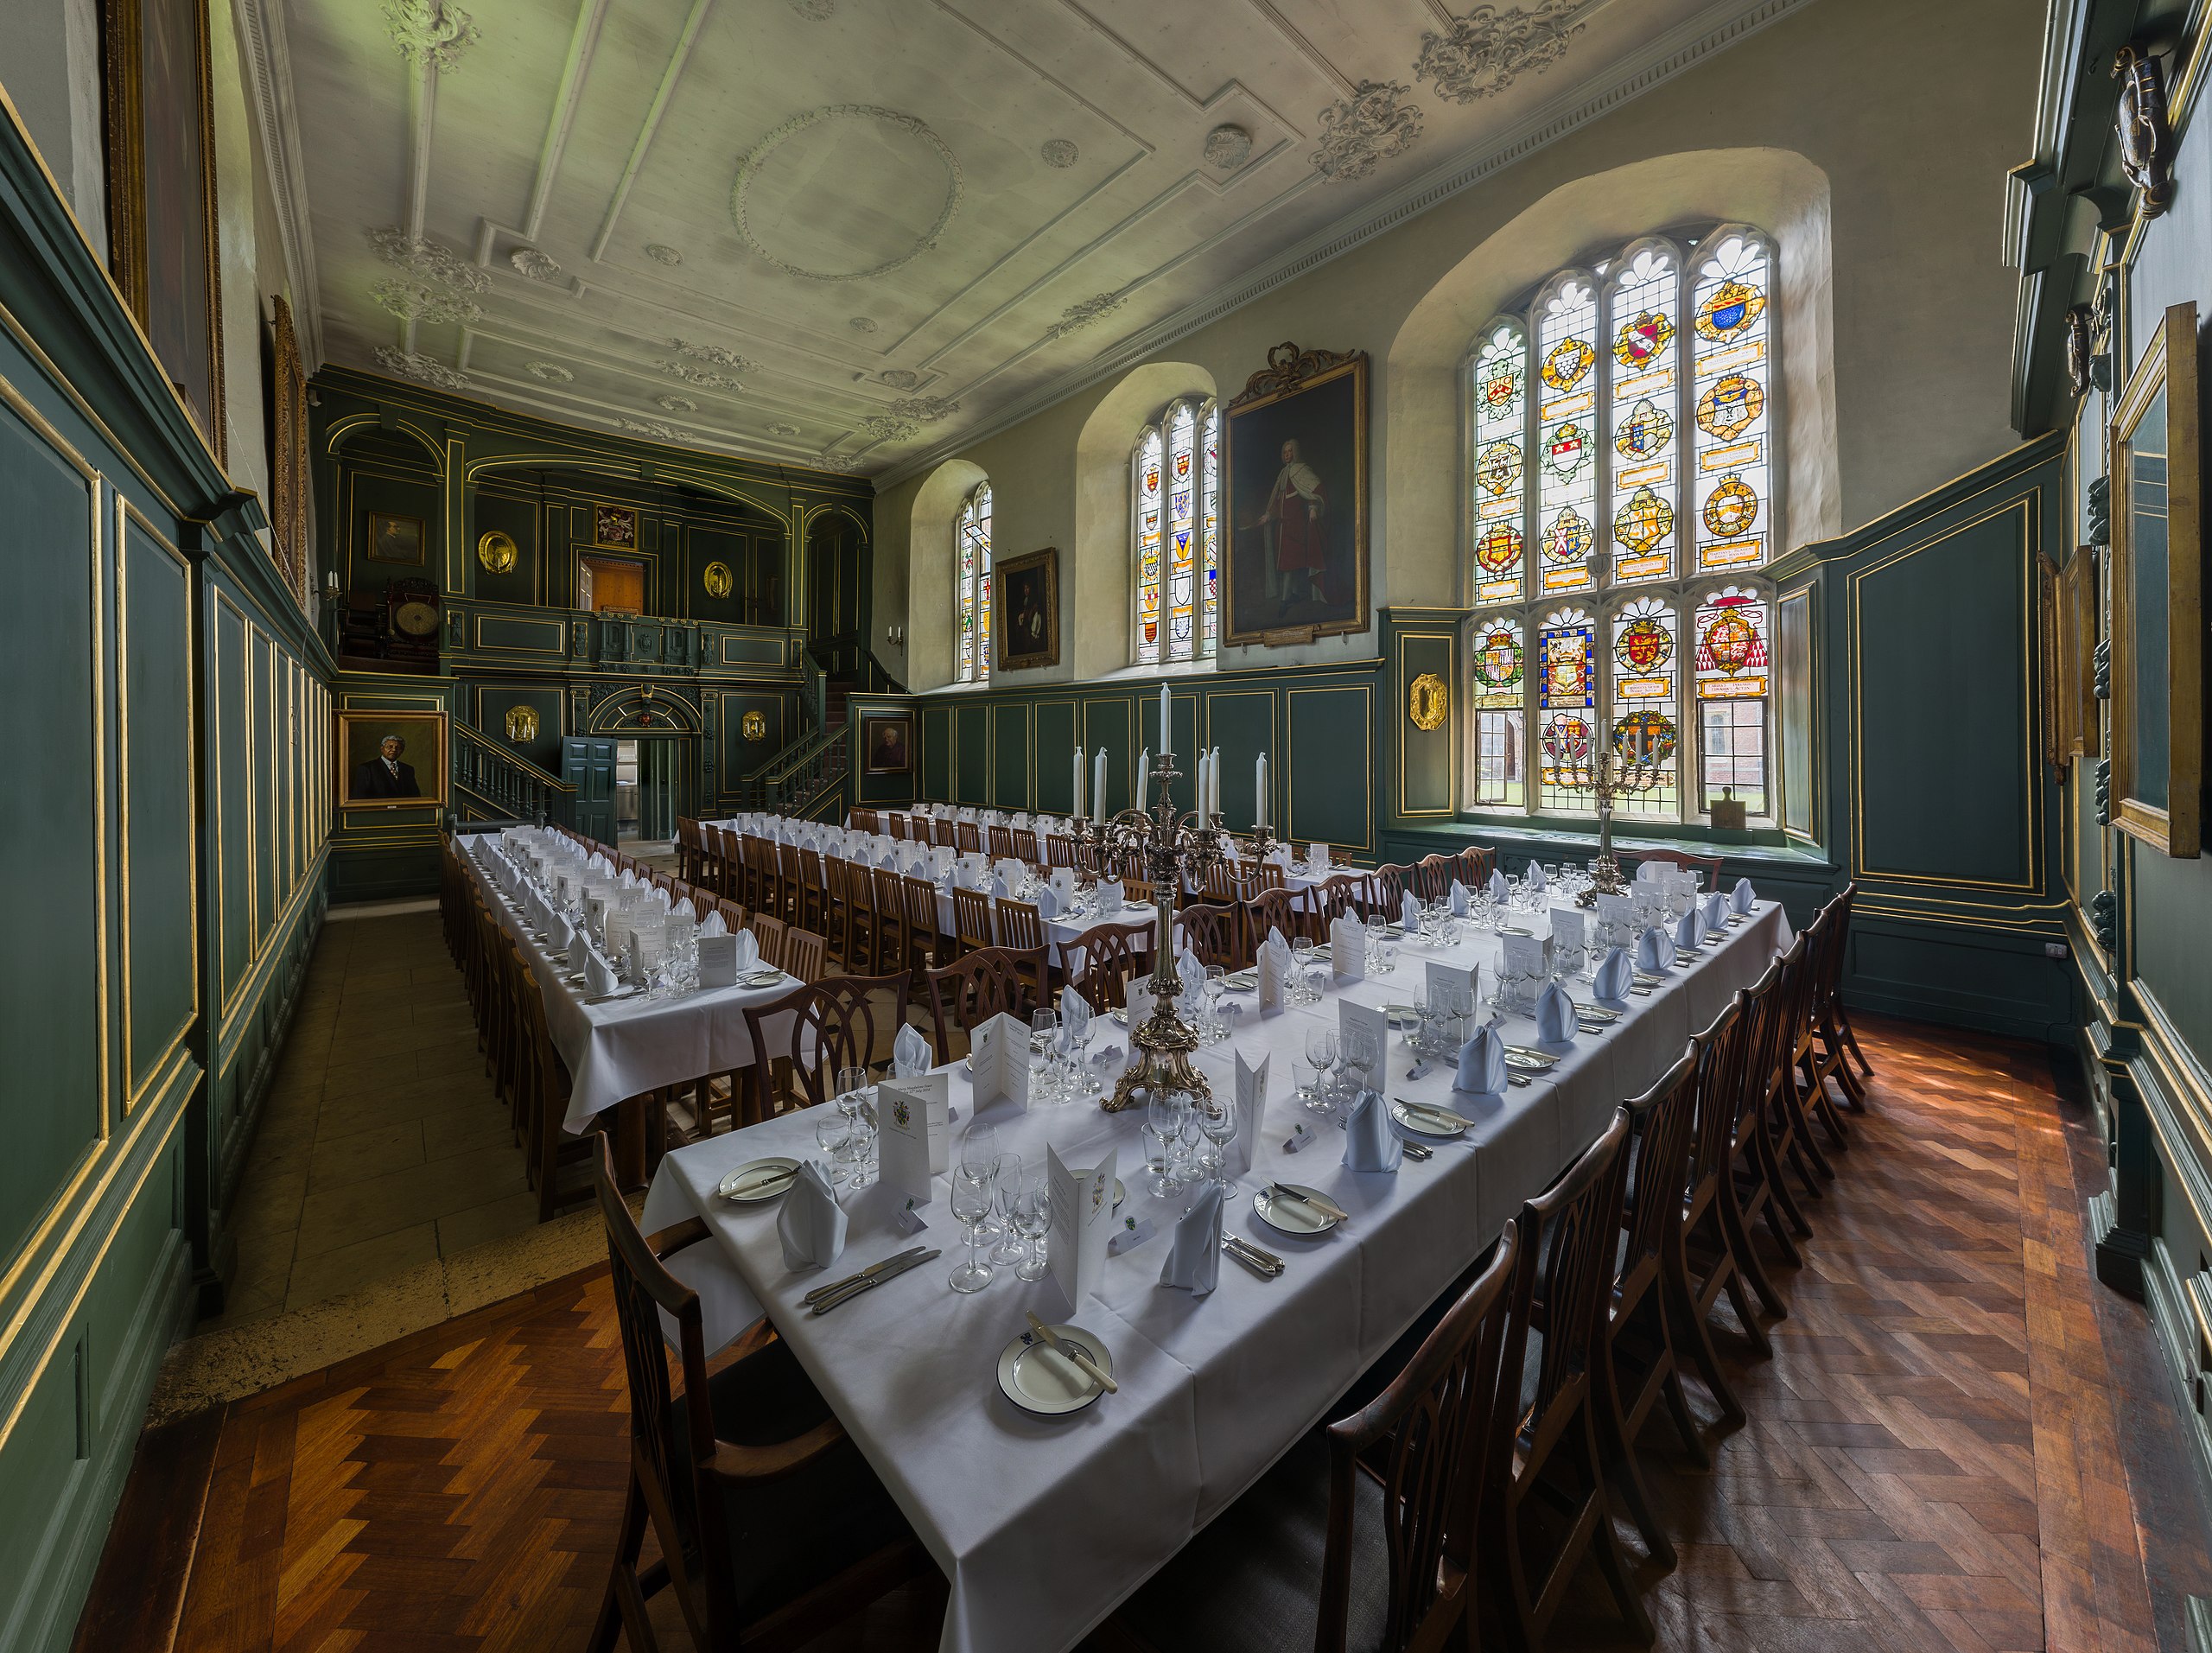 The dining hall at Magdalene College. Photo by DAVID ILIFF. License: CC BY-SA 3.0